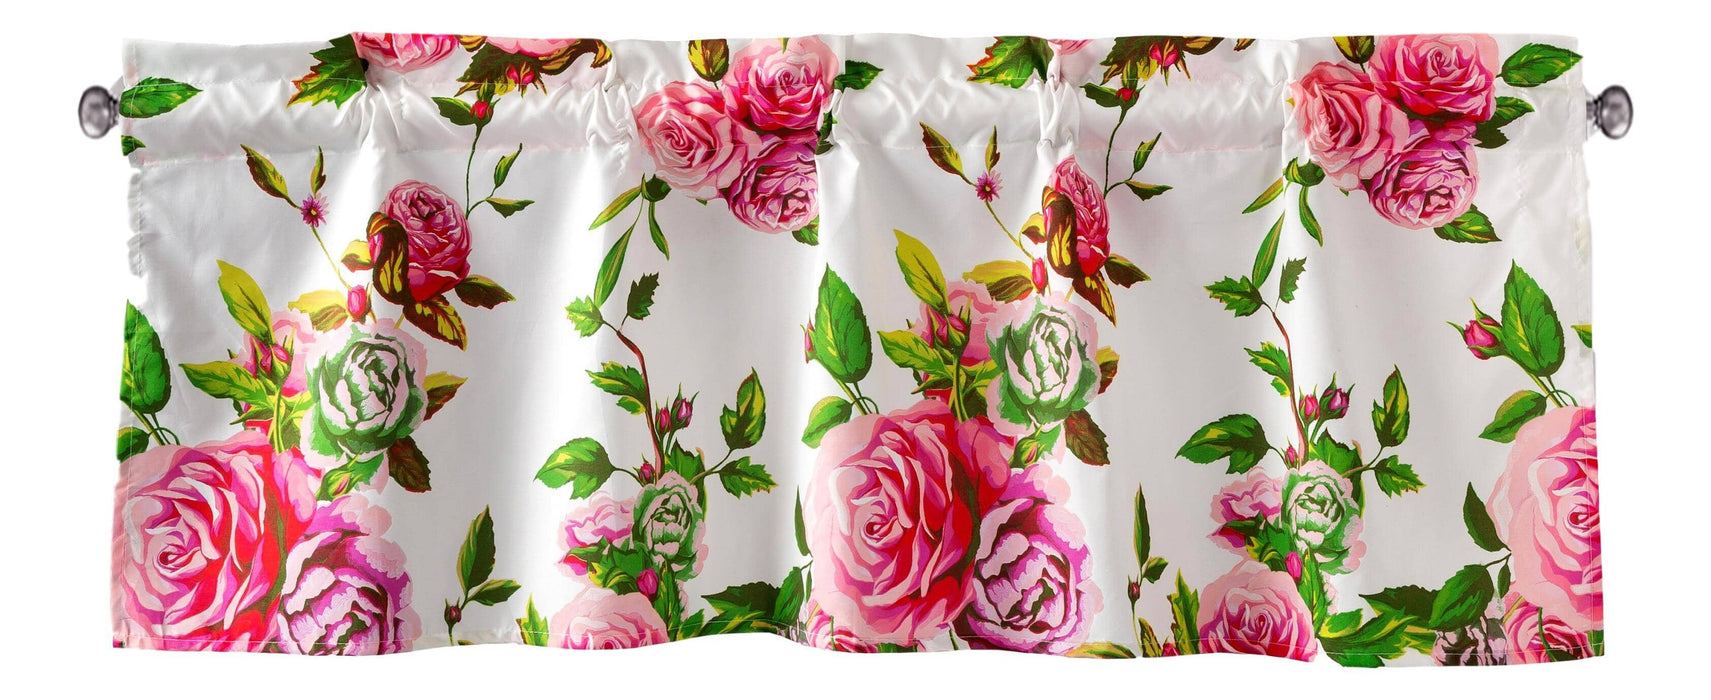 DaDa Bedding Romantic Roses Pink Floral Window Curtain Valance - 18" x 52" (JHW-879)